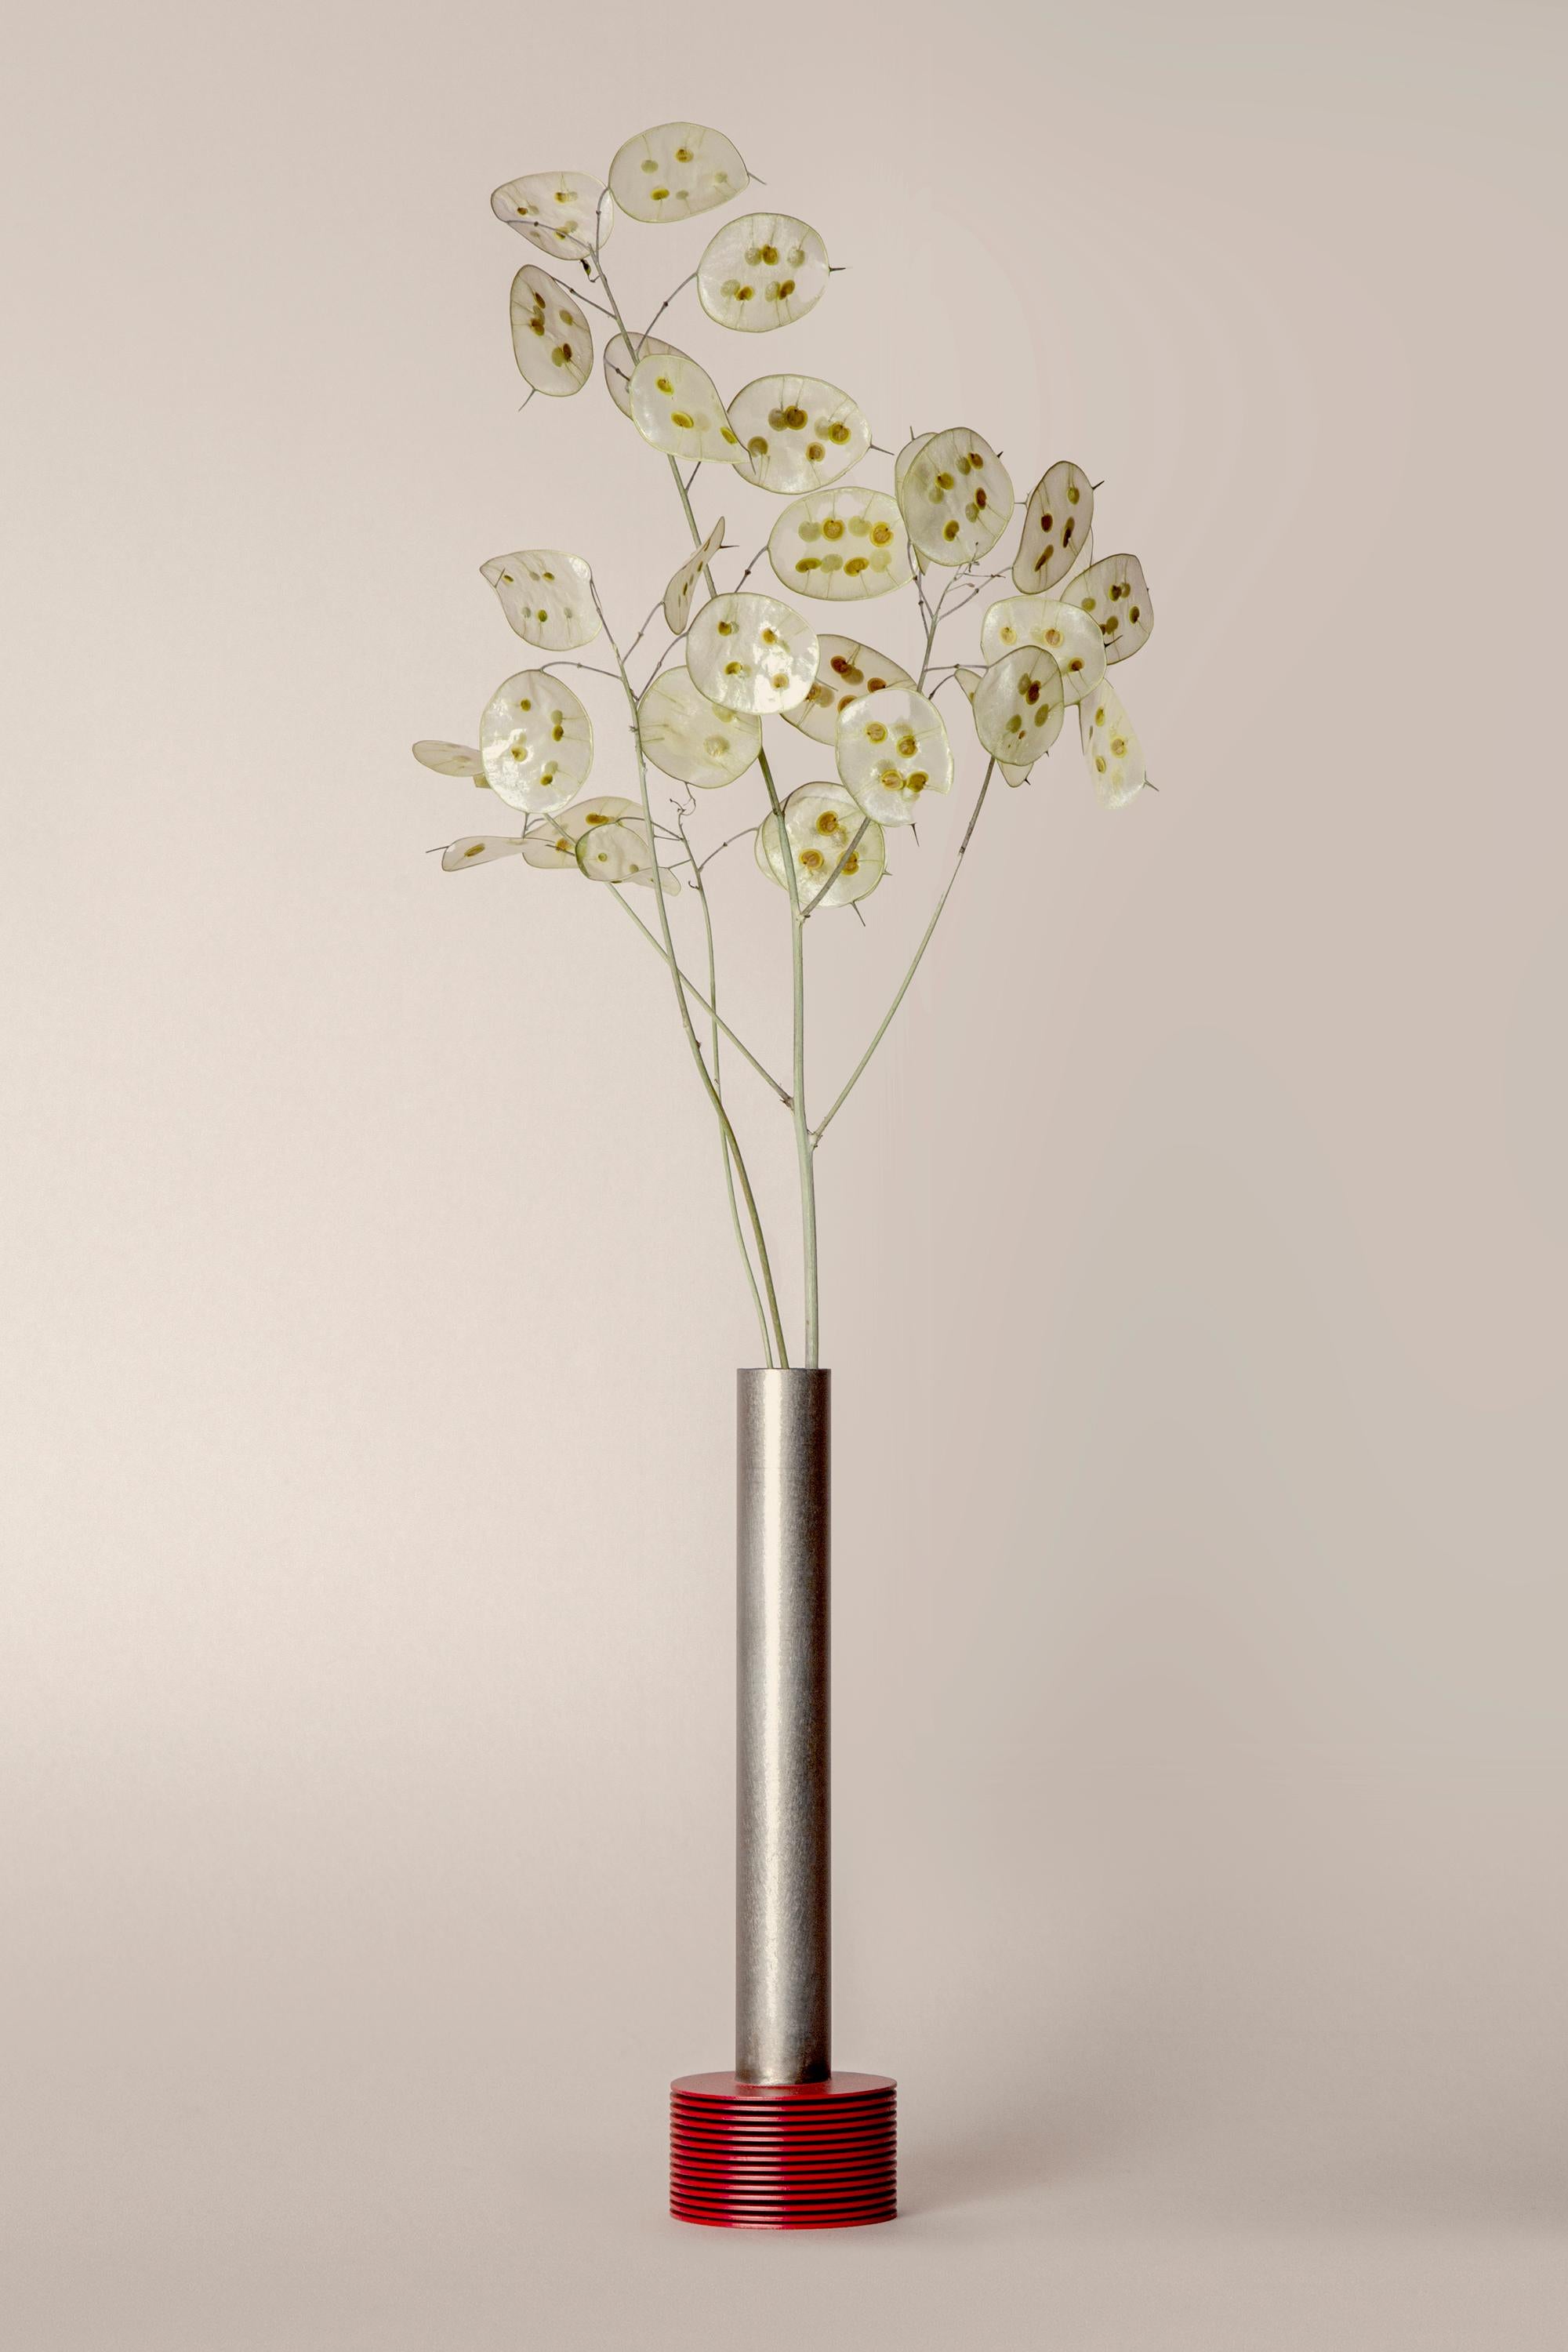 One popular way of arranging flowers in Japan is the single-flower vase. Far from being luxurious, it is a sense of wabi-sabi.
I am moved emotionally by minute changes in nature.
It is usually invisible, but it is supported by being there. This work